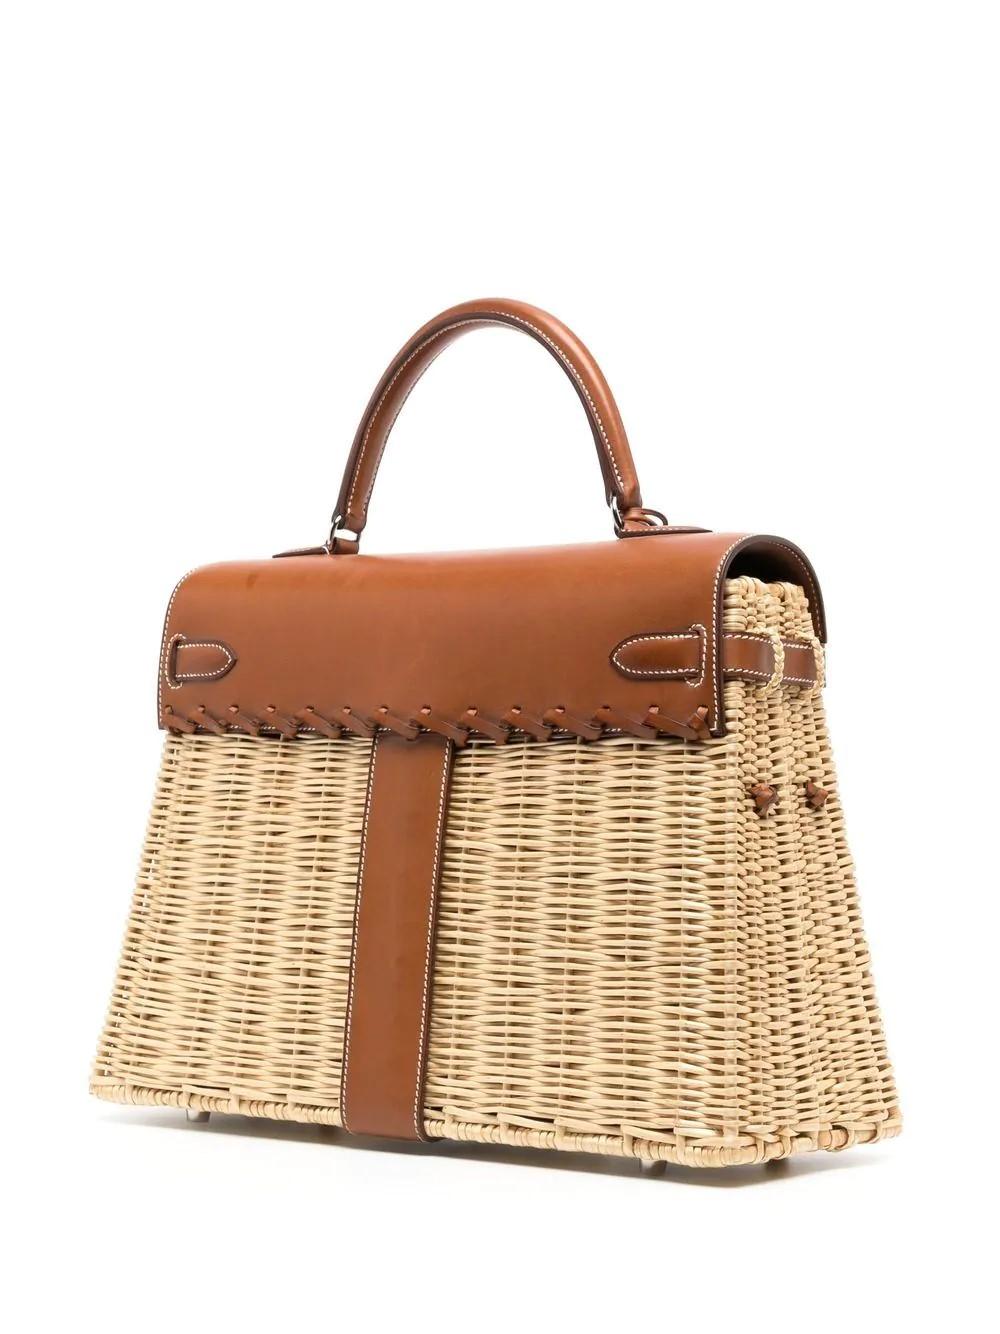 Women's or Men's Limited Edition Hermes Picnic Kelly 35 For Sale